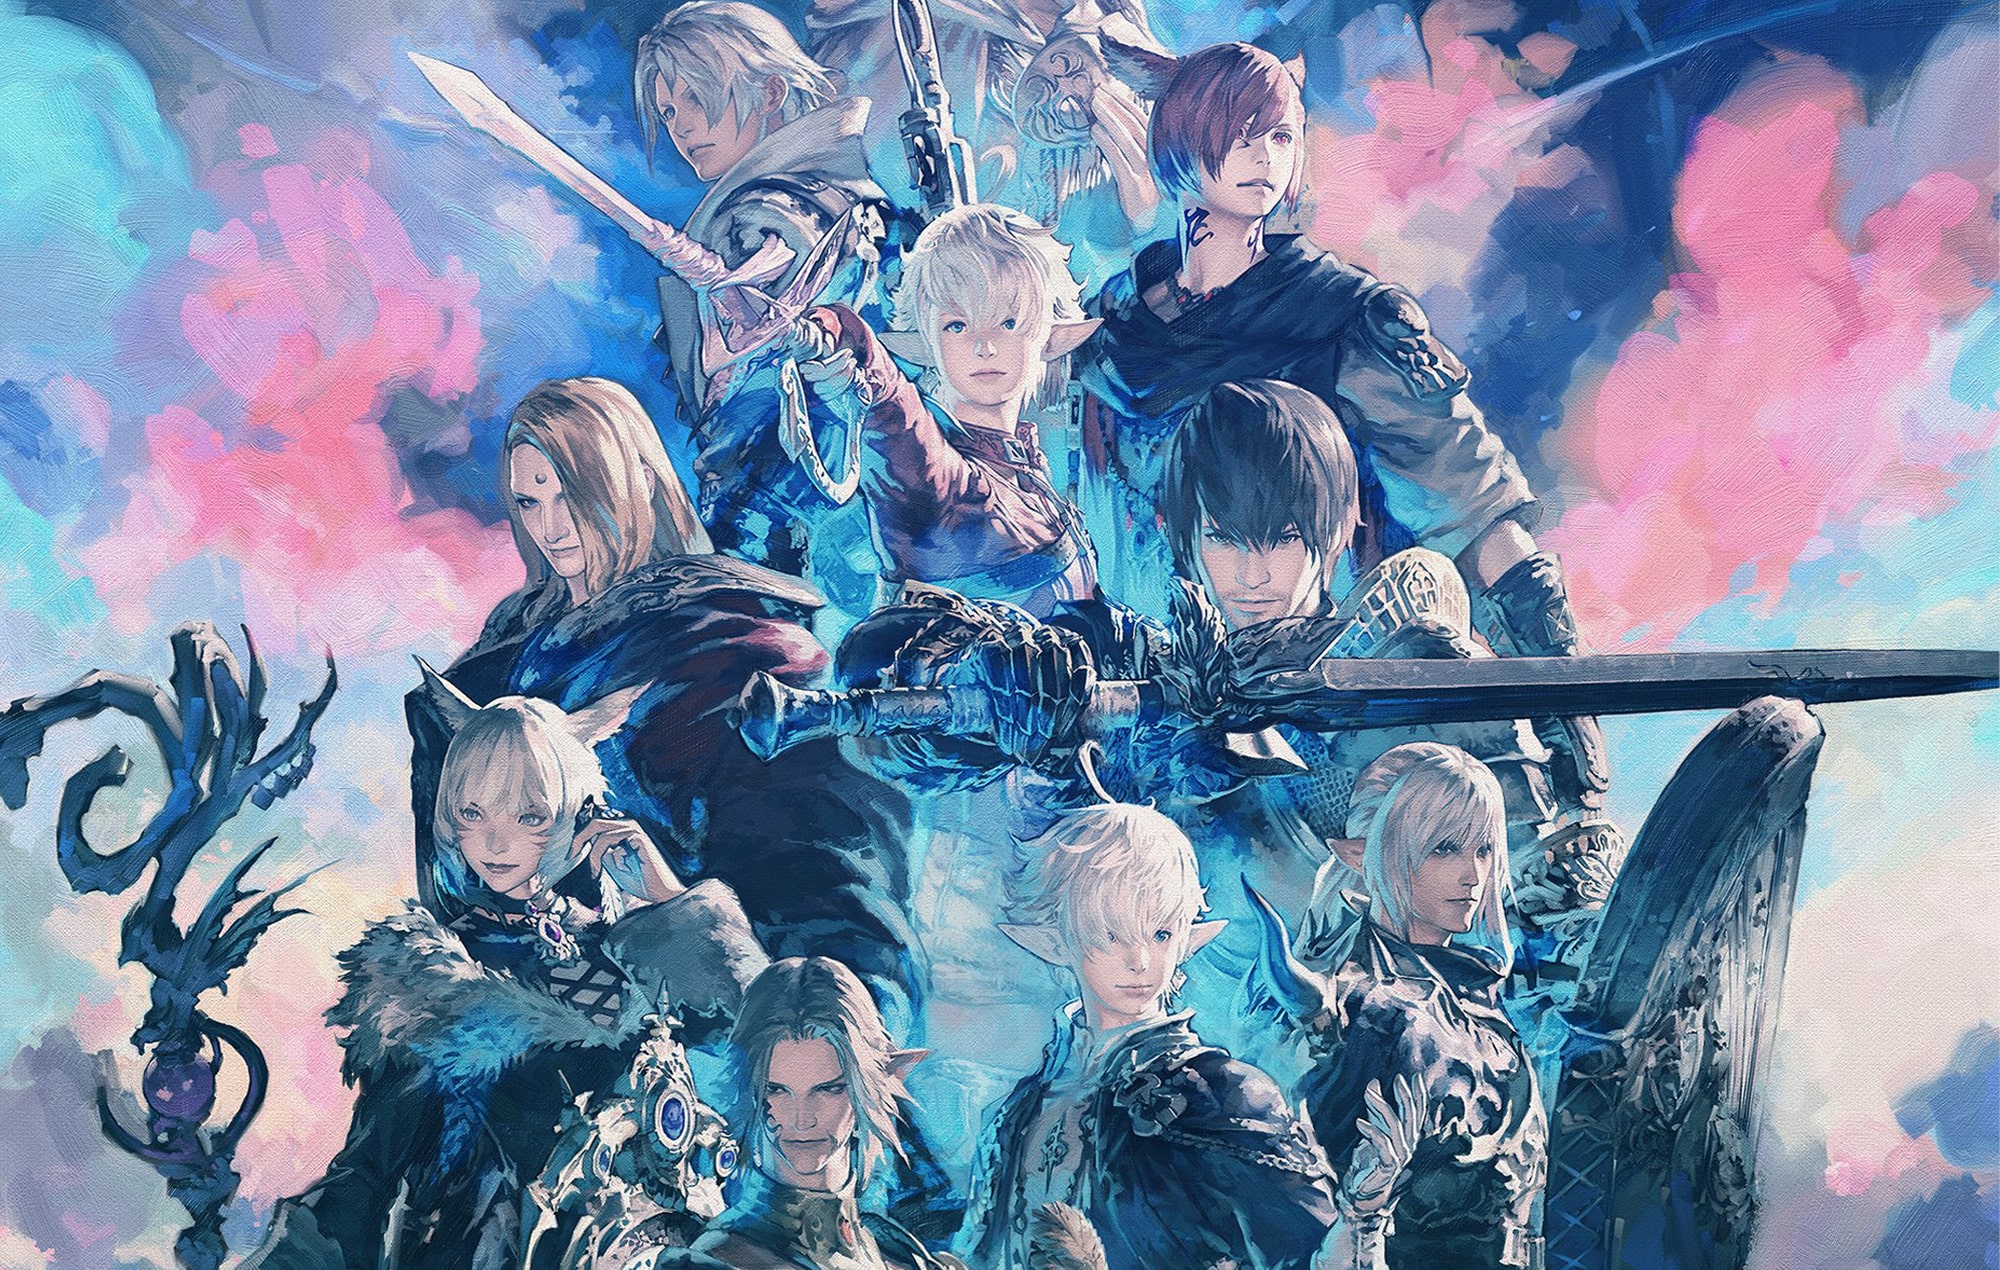 Info About The Next FFXIV Expansion Coming End of February, Says Yoshi